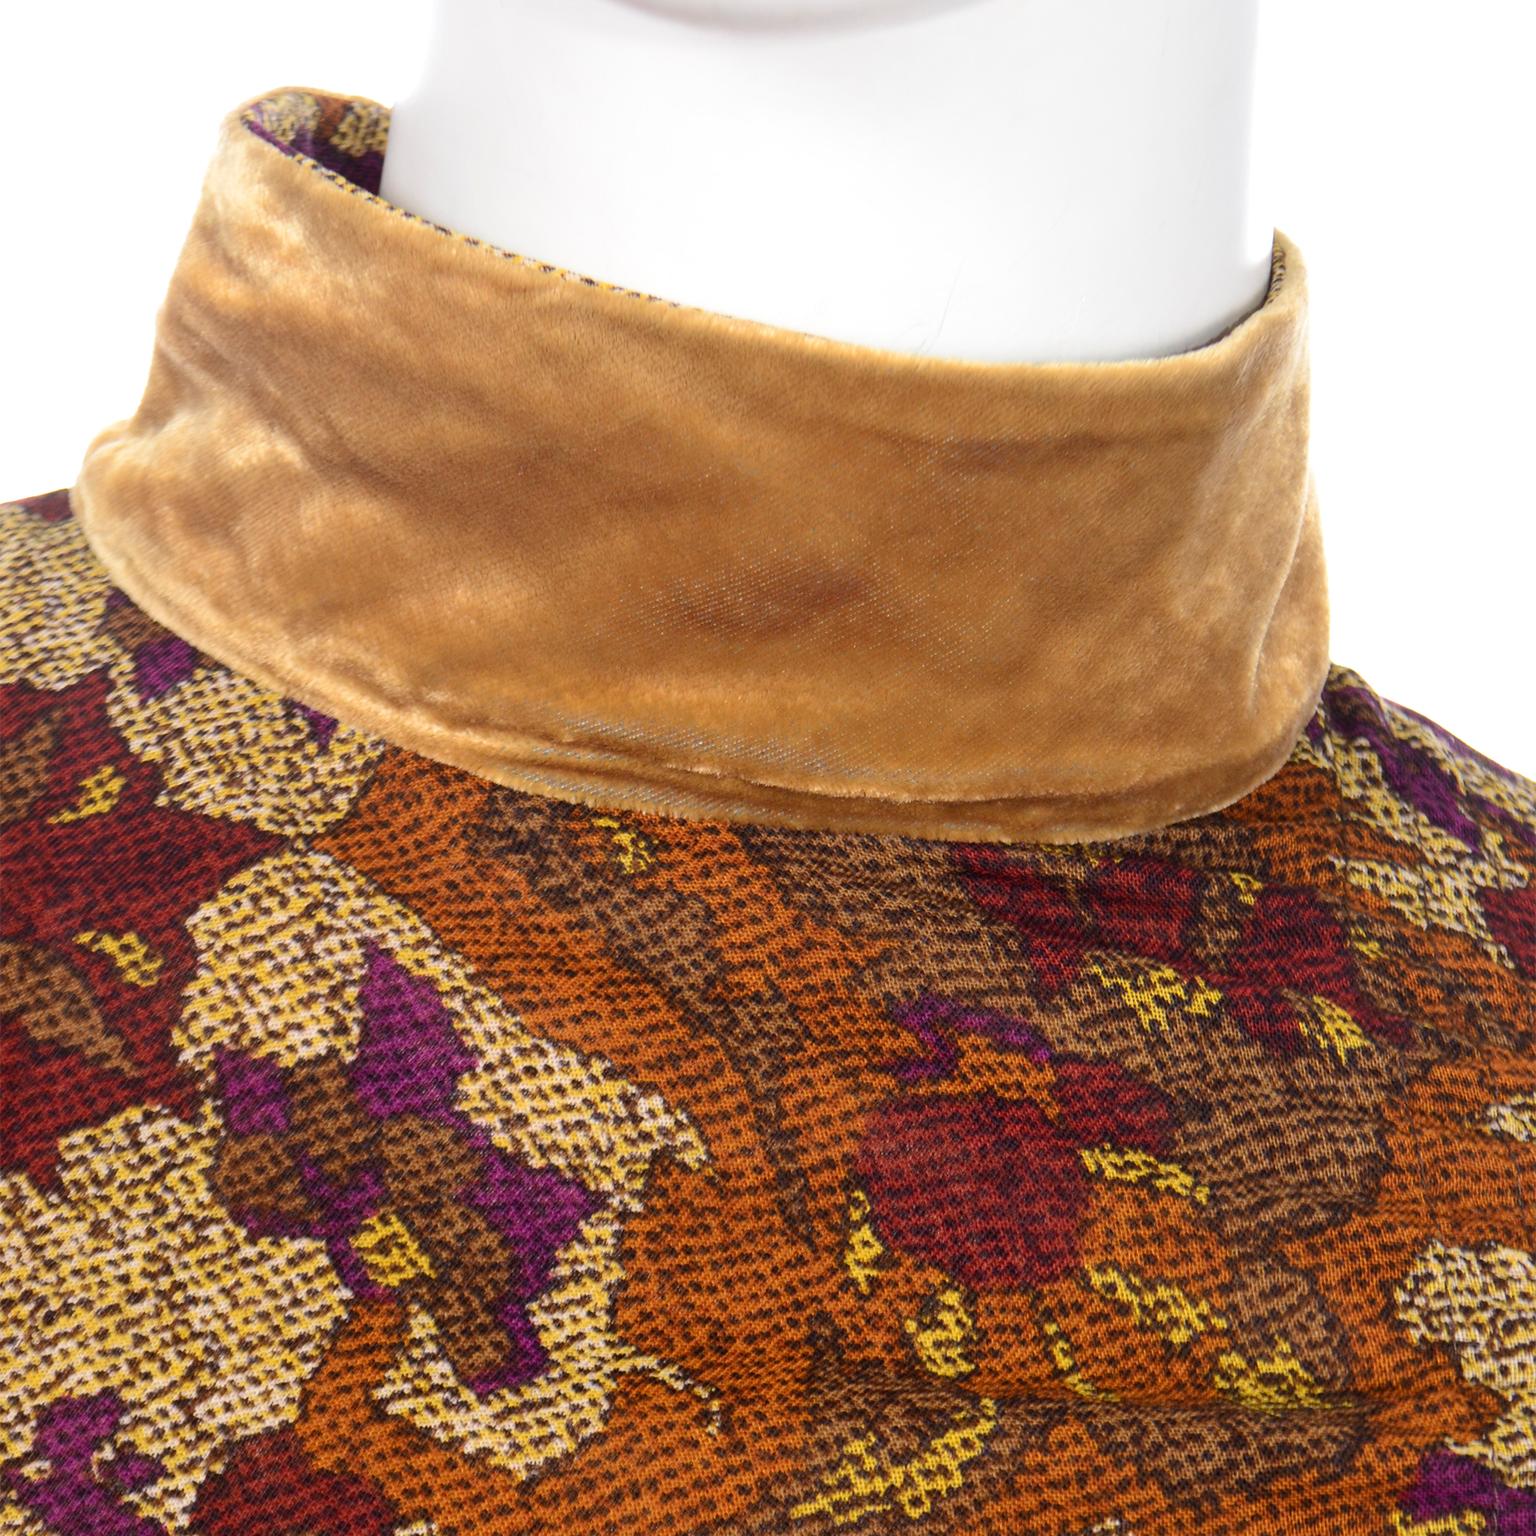 Kenzo Vintage Lush Plum Brown and Gold Floral Print Dress w Gold Velvet Trim In Excellent Condition For Sale In Portland, OR